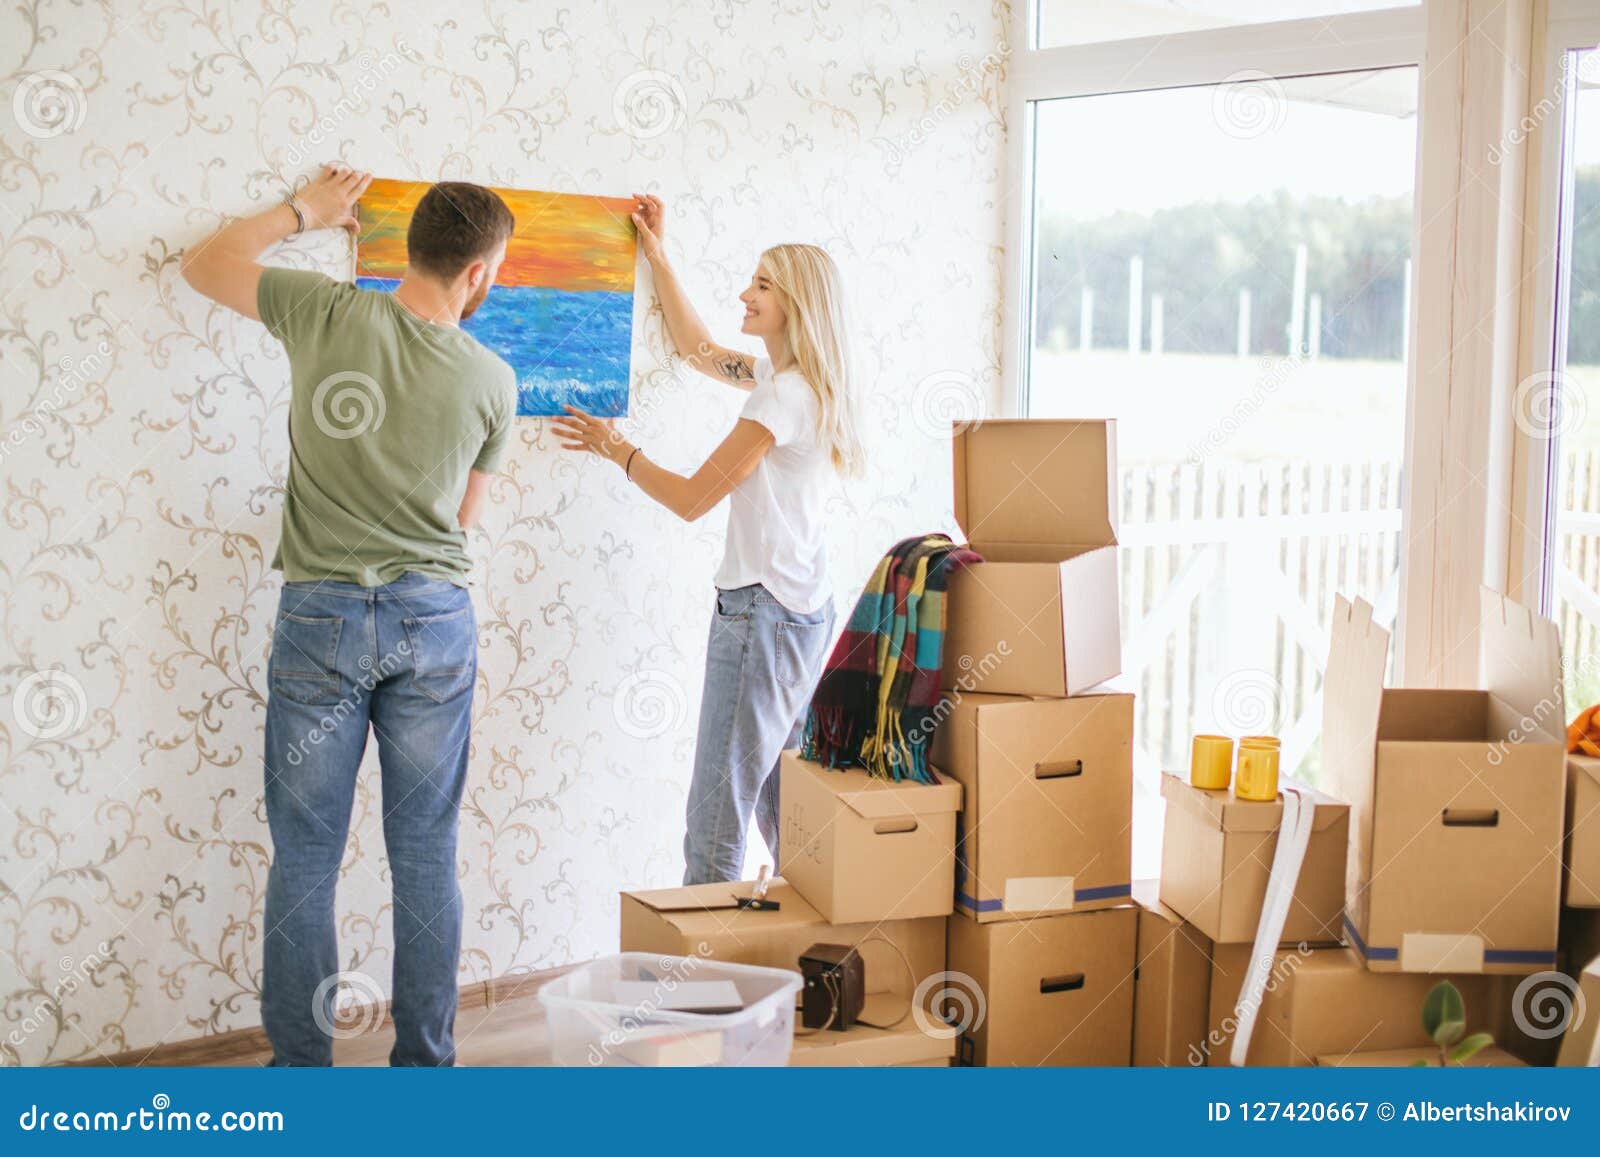 Moving House Couple Hanging Picture On Wall In New Home